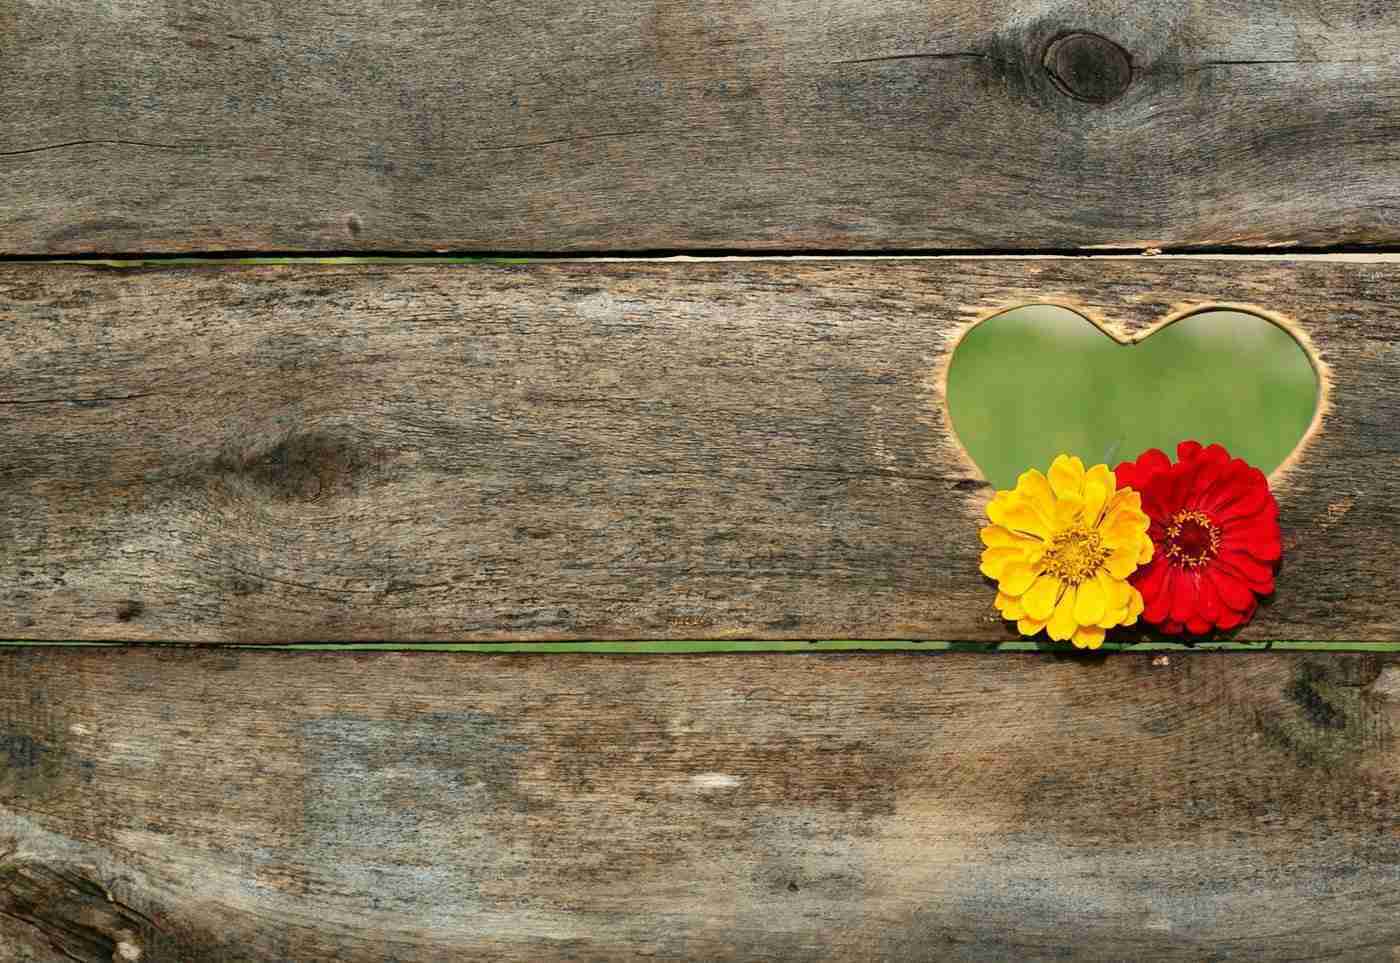 yellow and red flower in heart-shaped hole in board - a-z list of different types of flowers